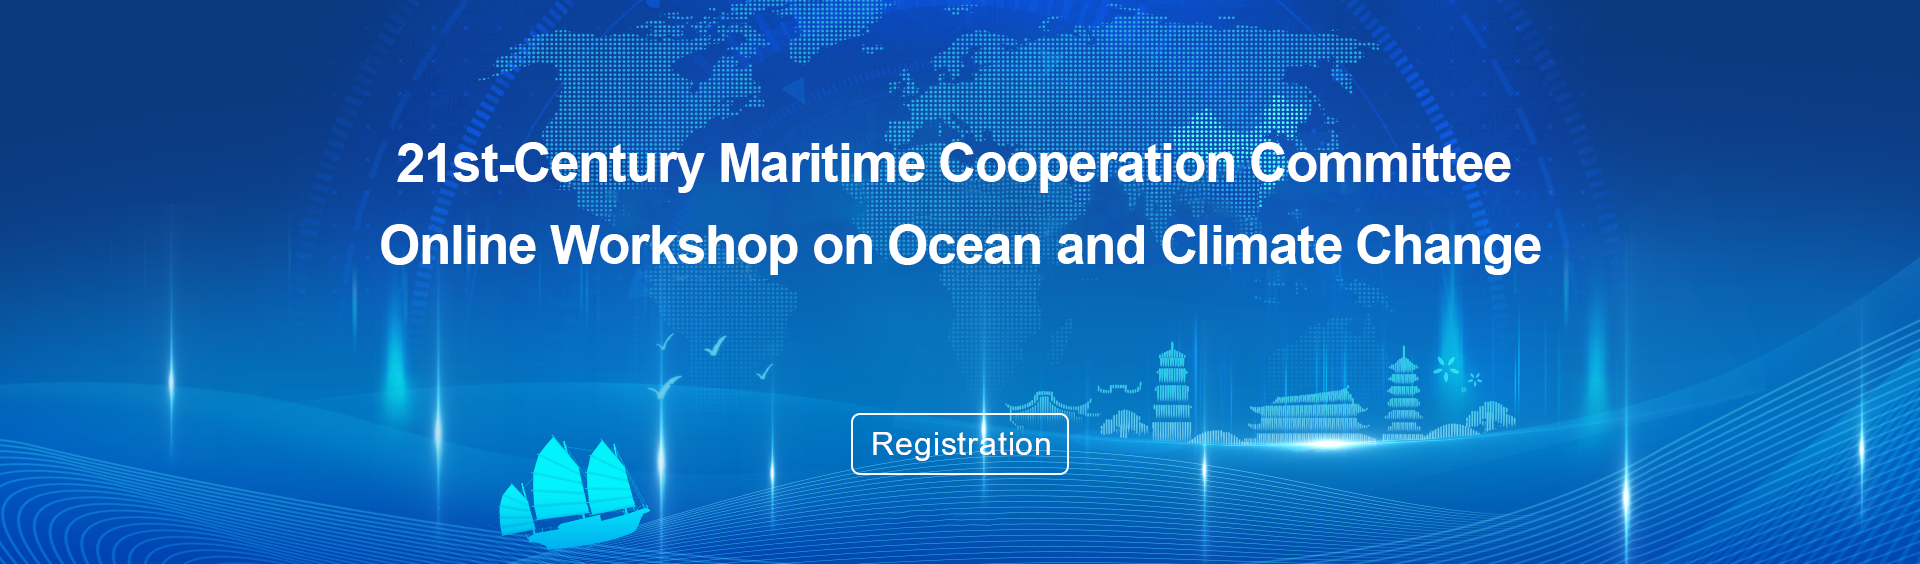 21st-Century Maritime Cooperation Committee Online Workshop on Ocean and Climate Change